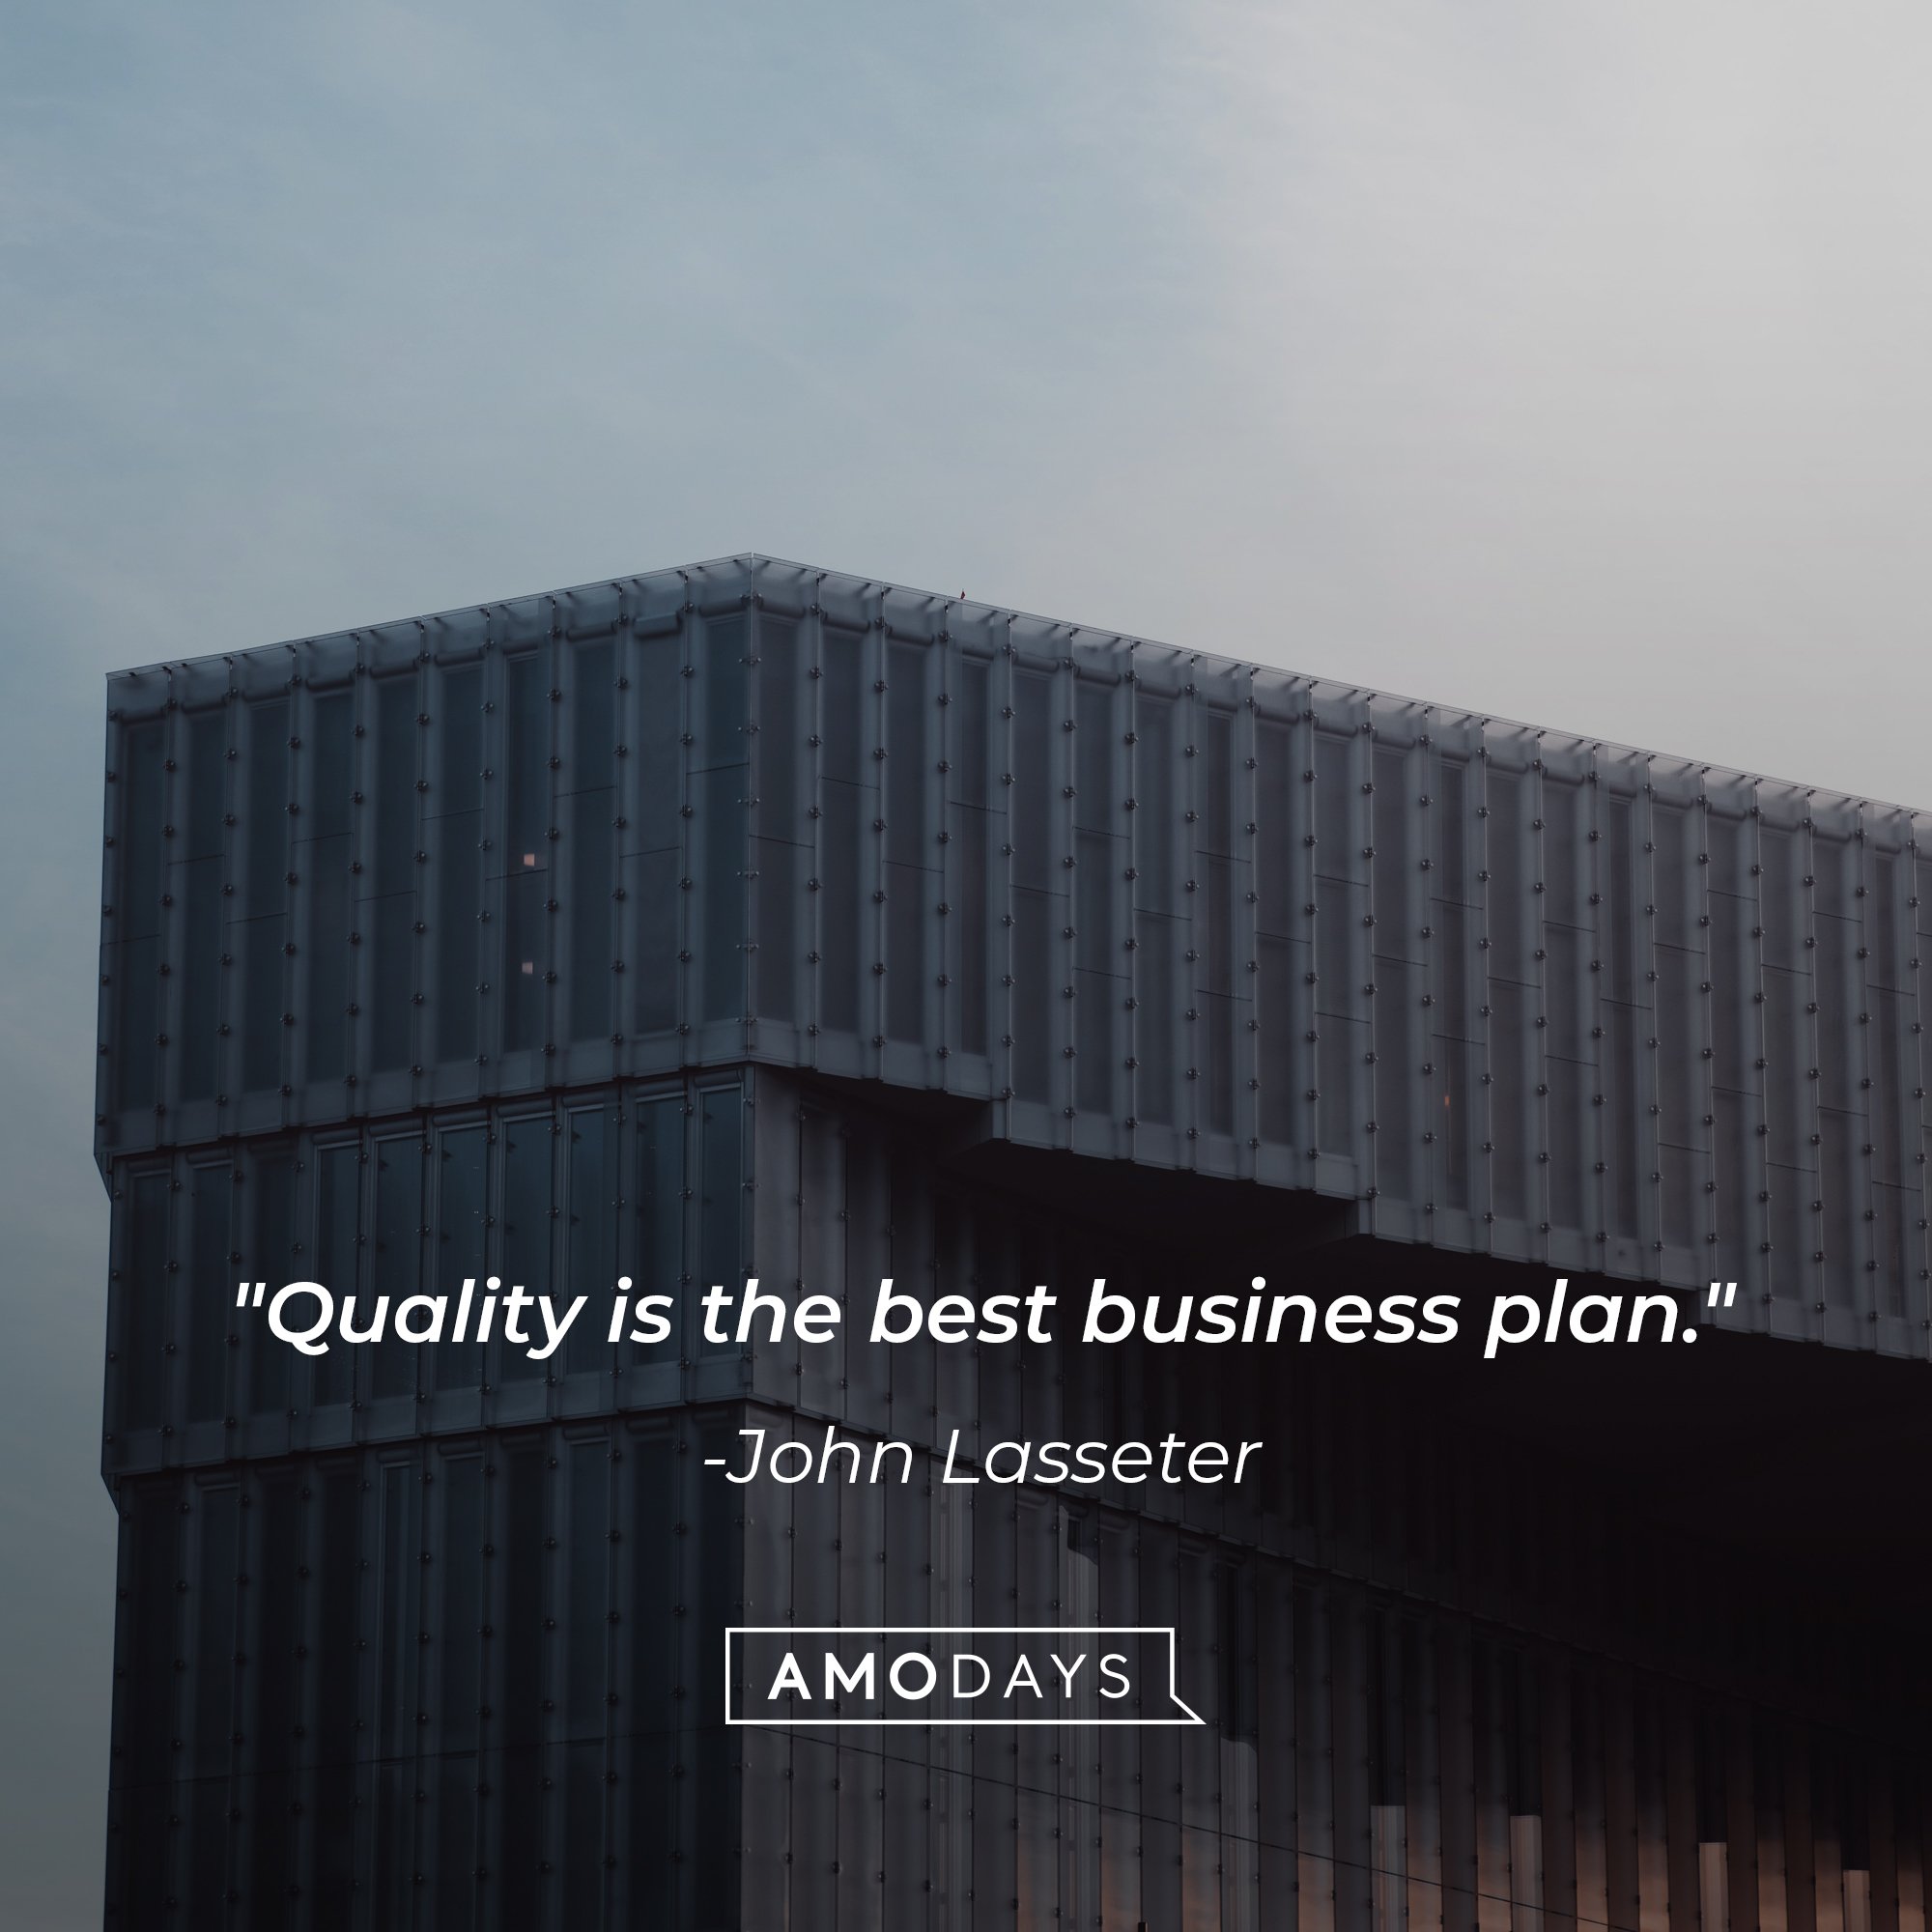 John Lasseter’s quote: "Quality is the best business plan." | Image: AmoDays 